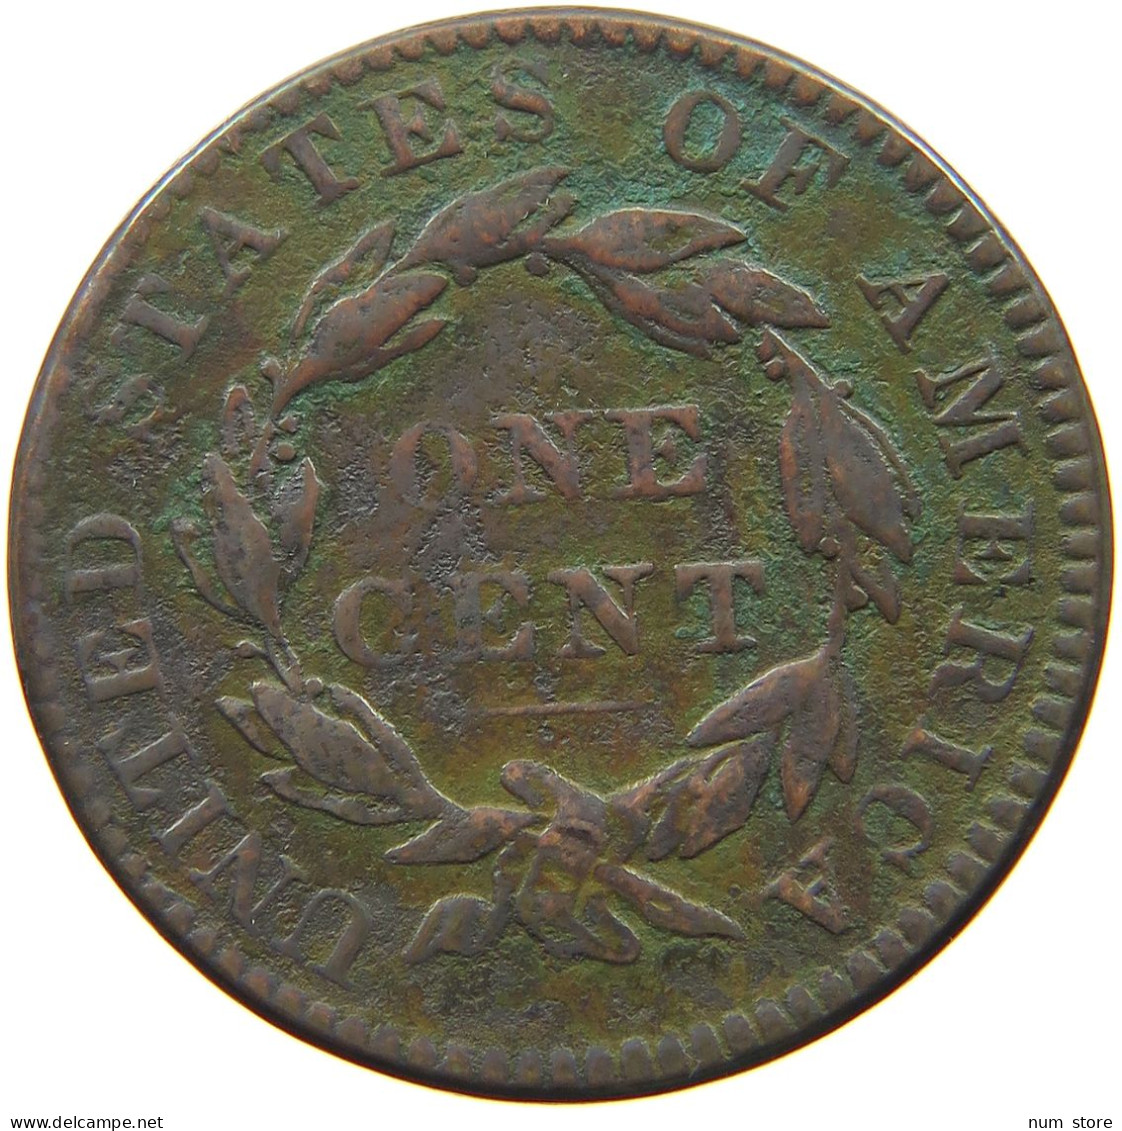 UNITED STATES OF AMERICA LARGE CENT 1831 CORONET HEAD #t141 0273 - 1816-1839: Coronet Head (Tête Couronnée)